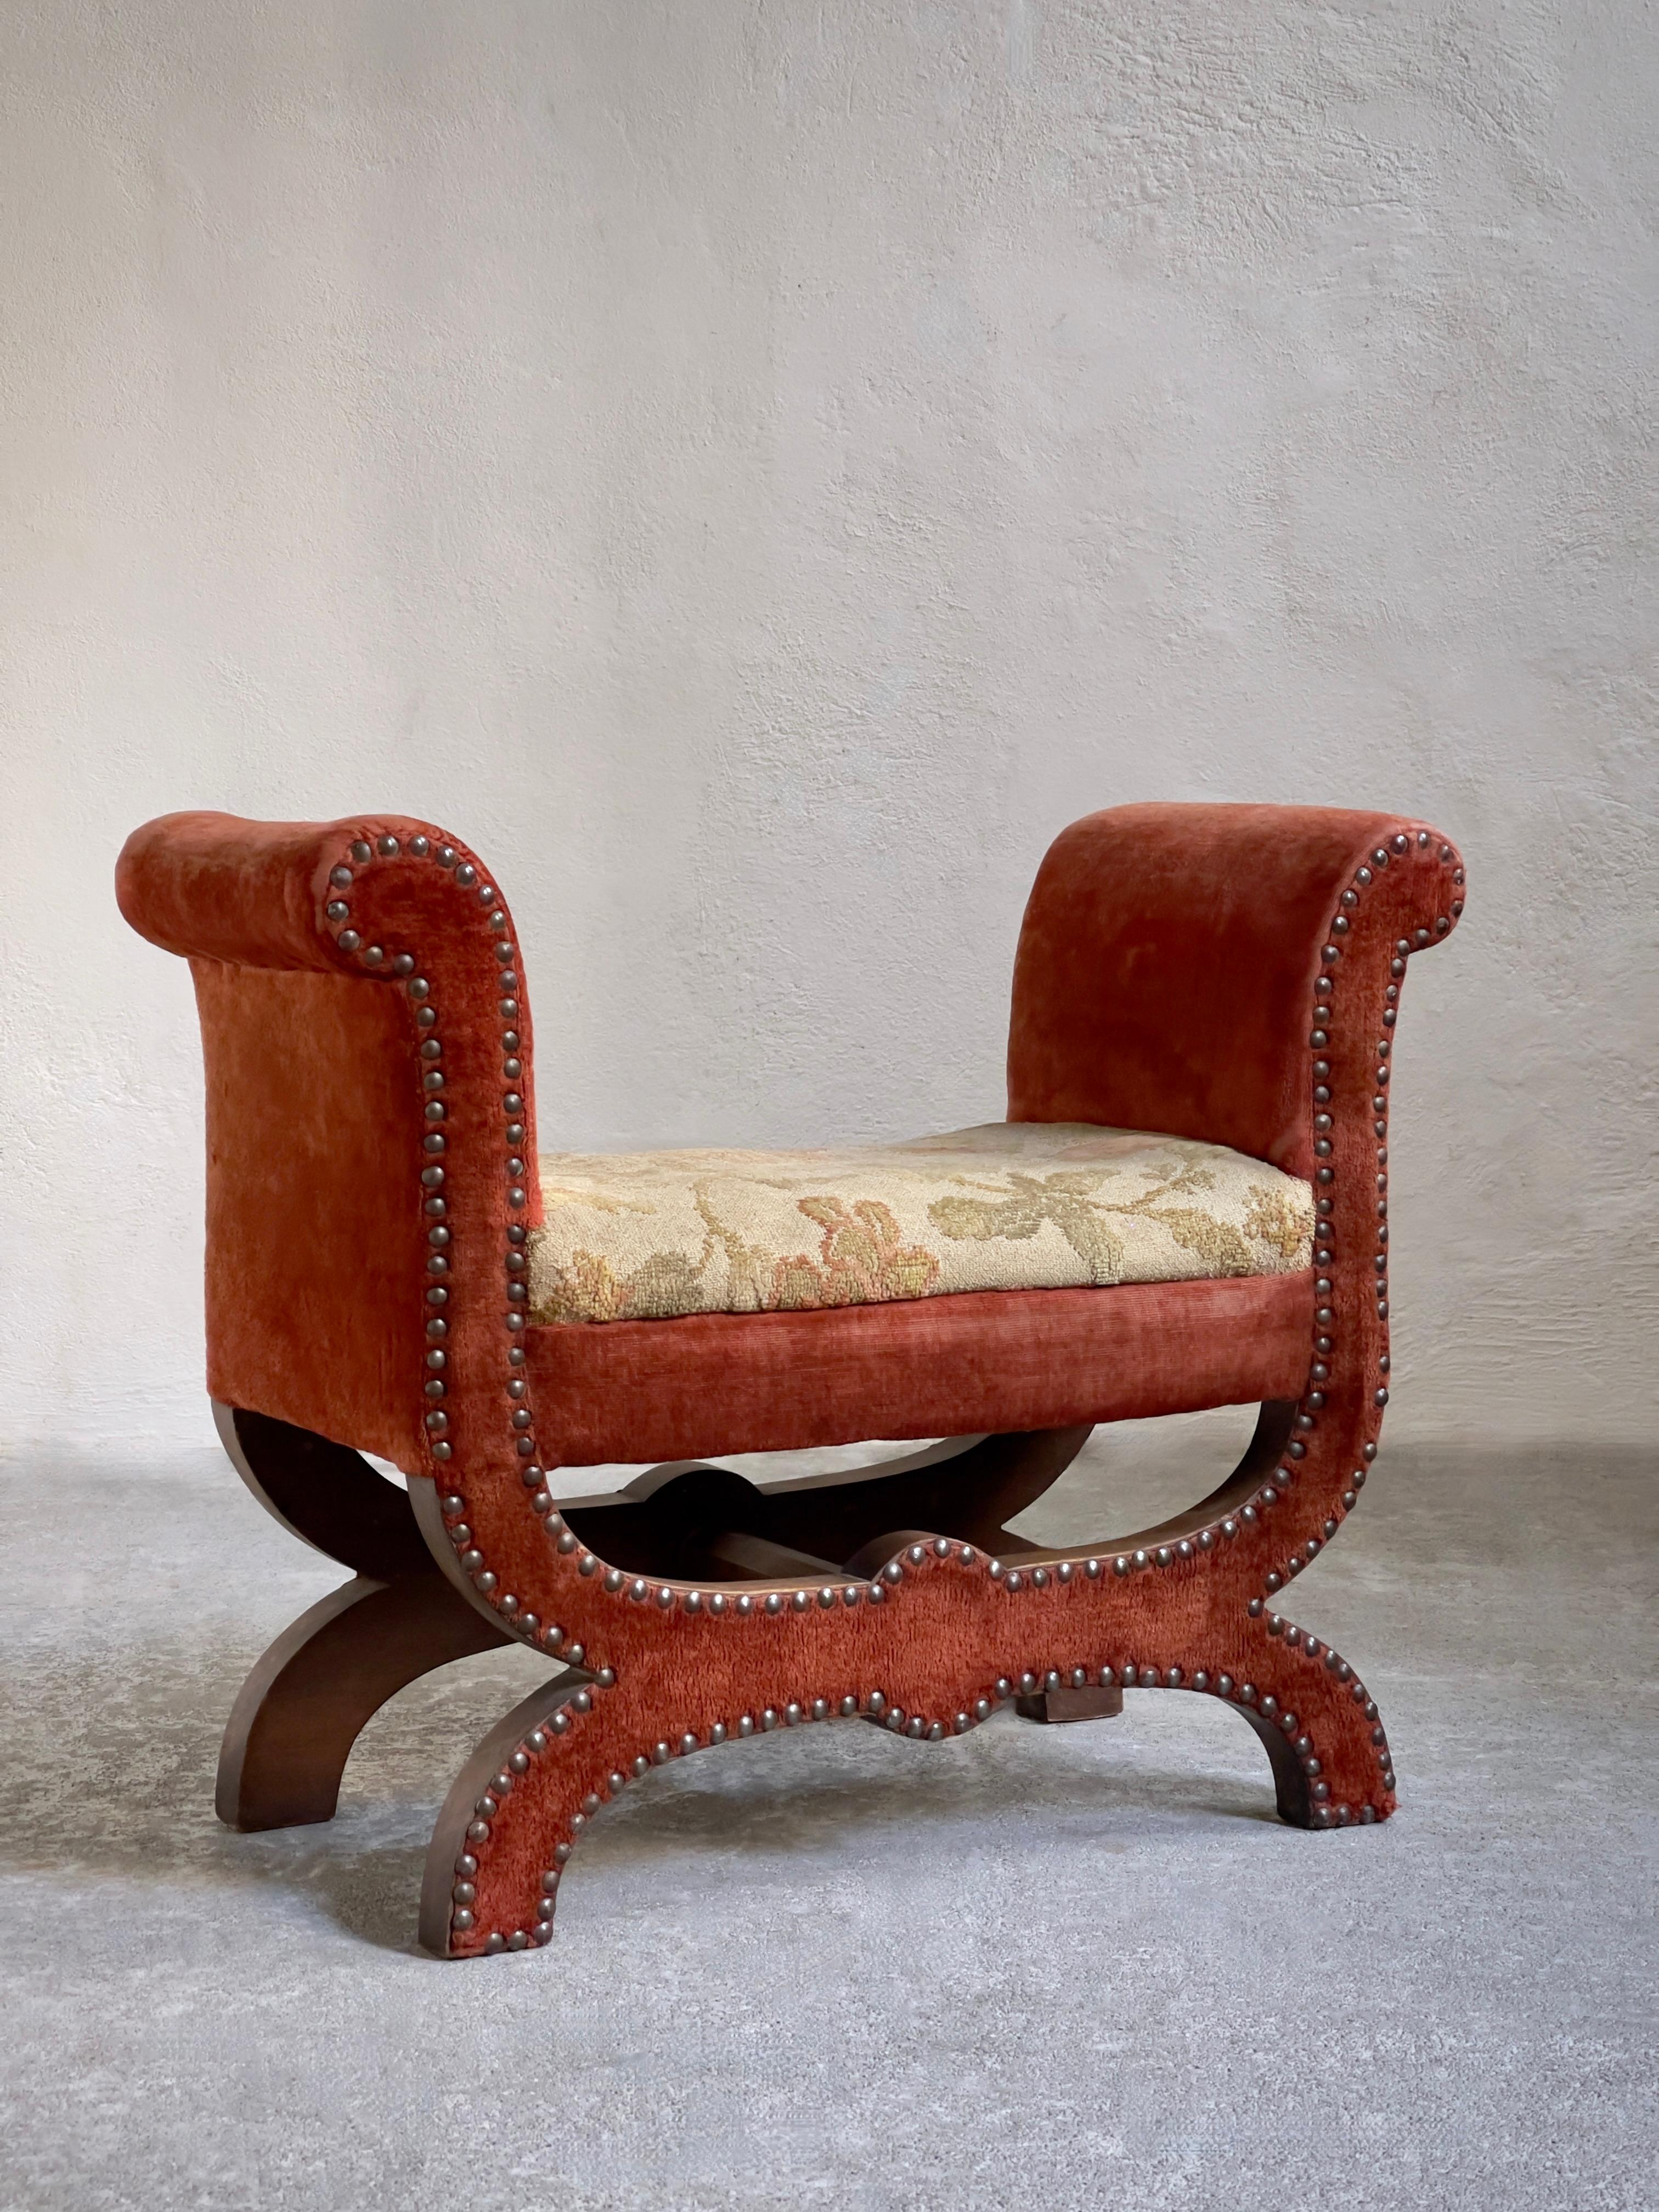 Original Otto Schultz stool with nailheads and fabric for Boet 1930s, Sweden.